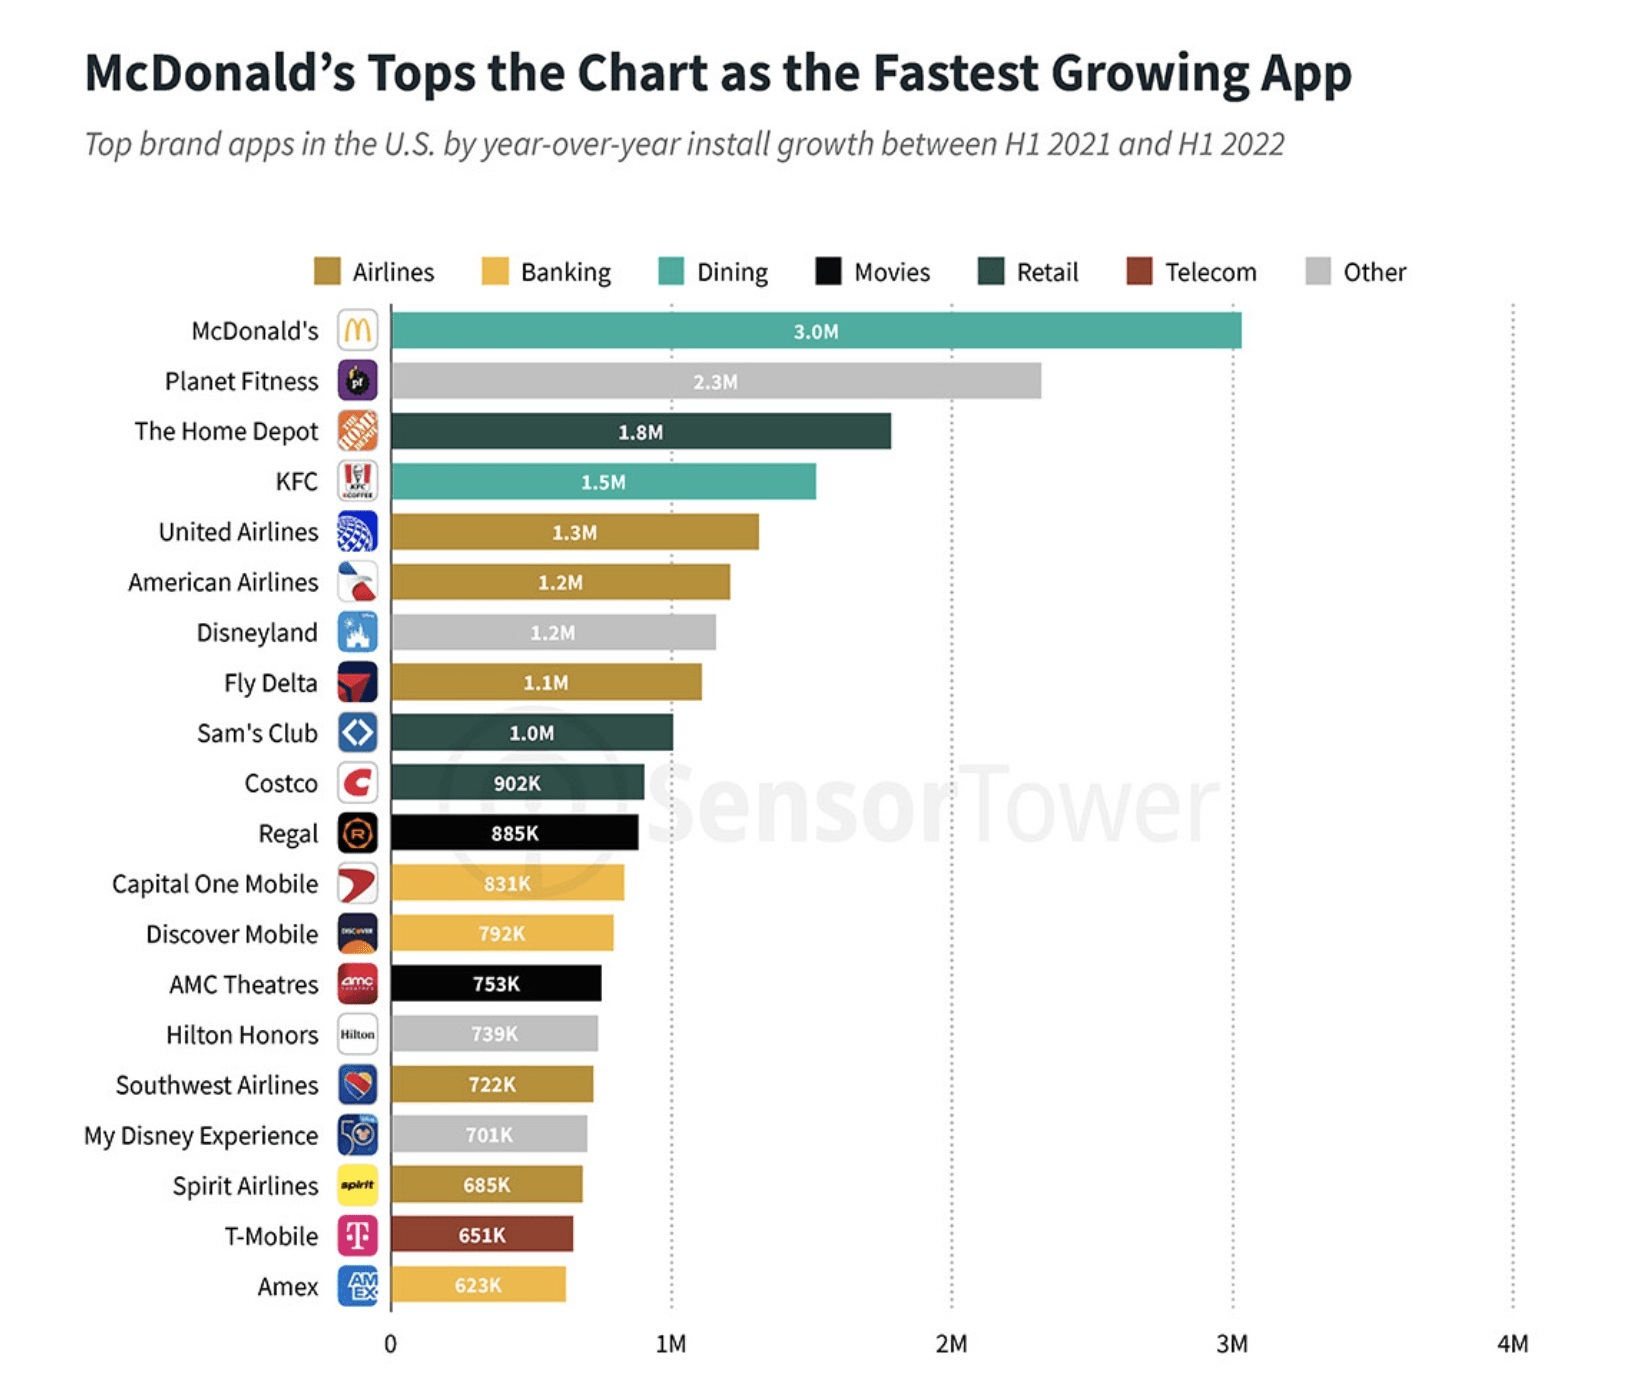 A list of the fastest growing apps from H1 2021 to H1 2022. McDonald's comes in at number one